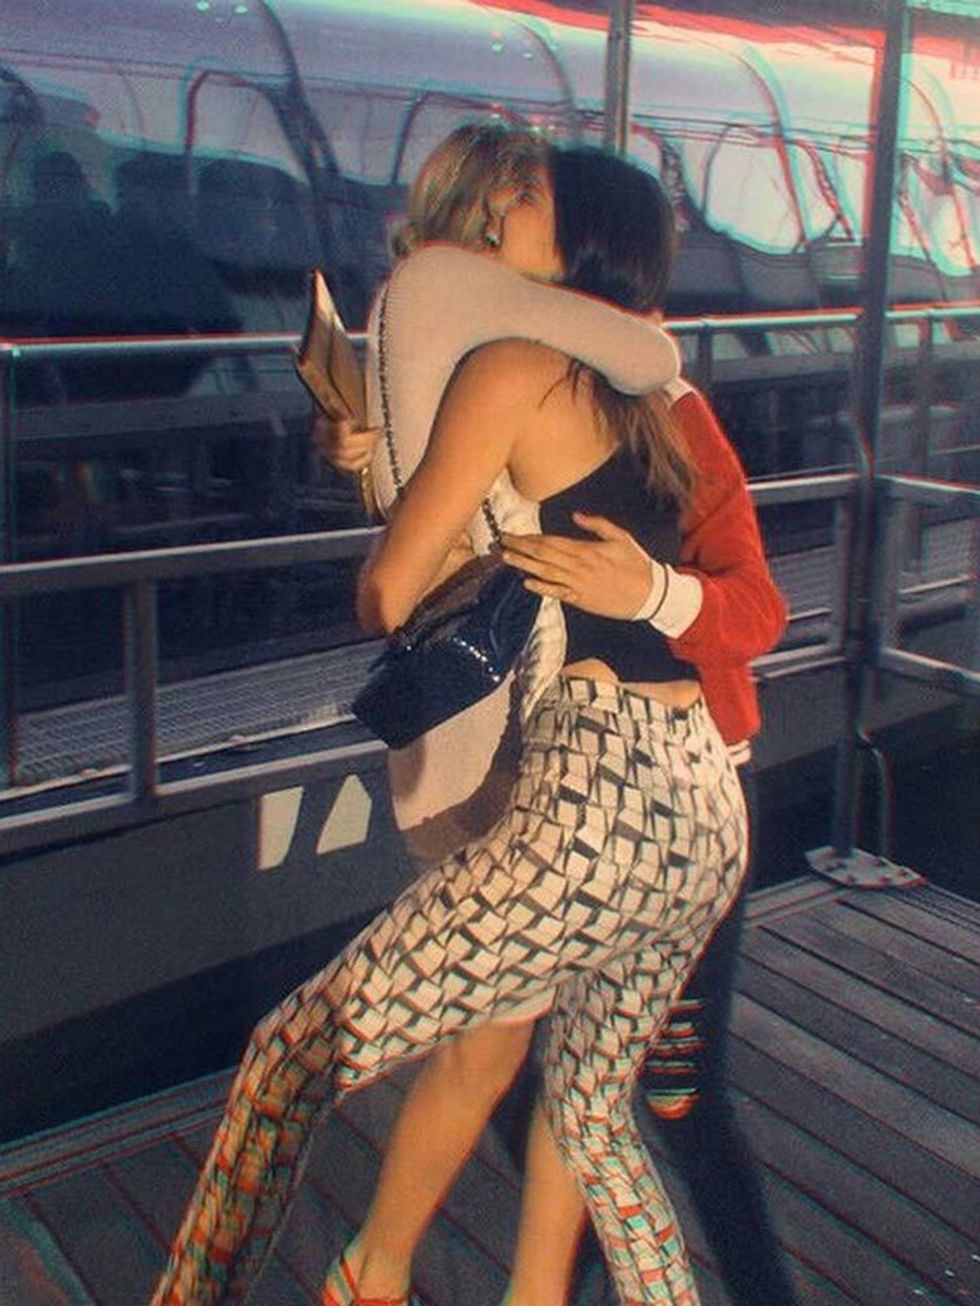 Gigi Hadid
(@Gigihadid)

'If this isn't love, I don't know what is...@kendalljenner @caradelevingne'